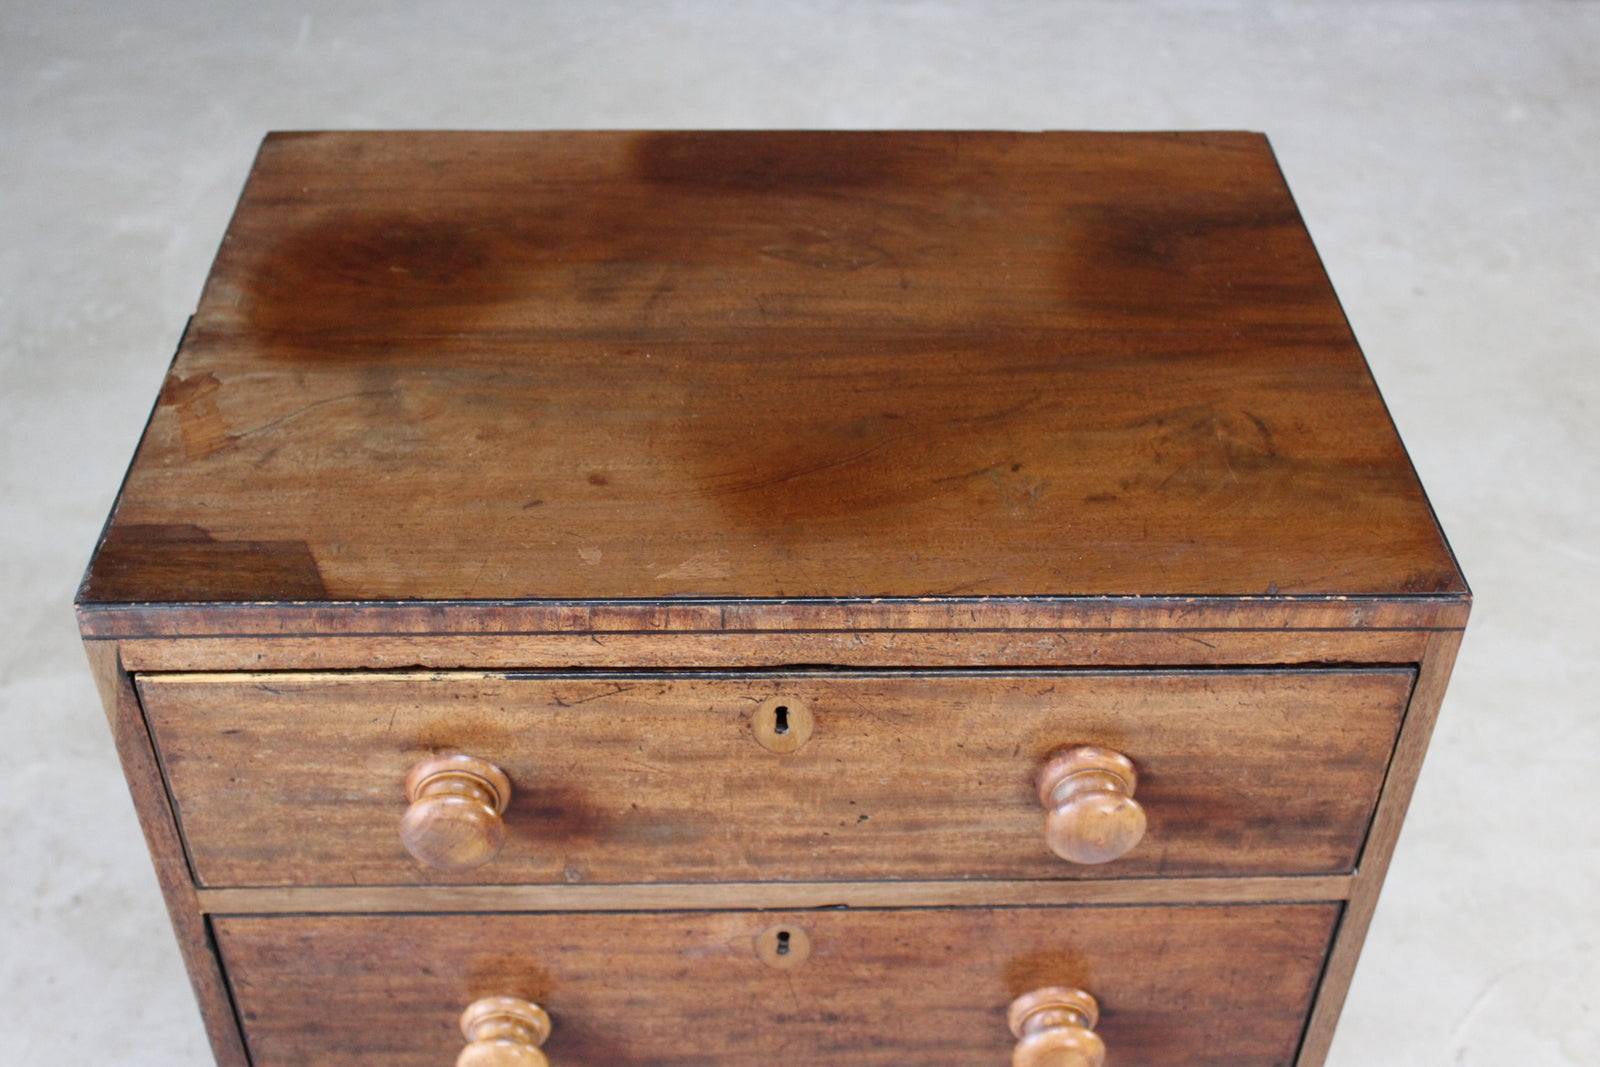 Antique Small Chest of Drawers - Kernow Furniture